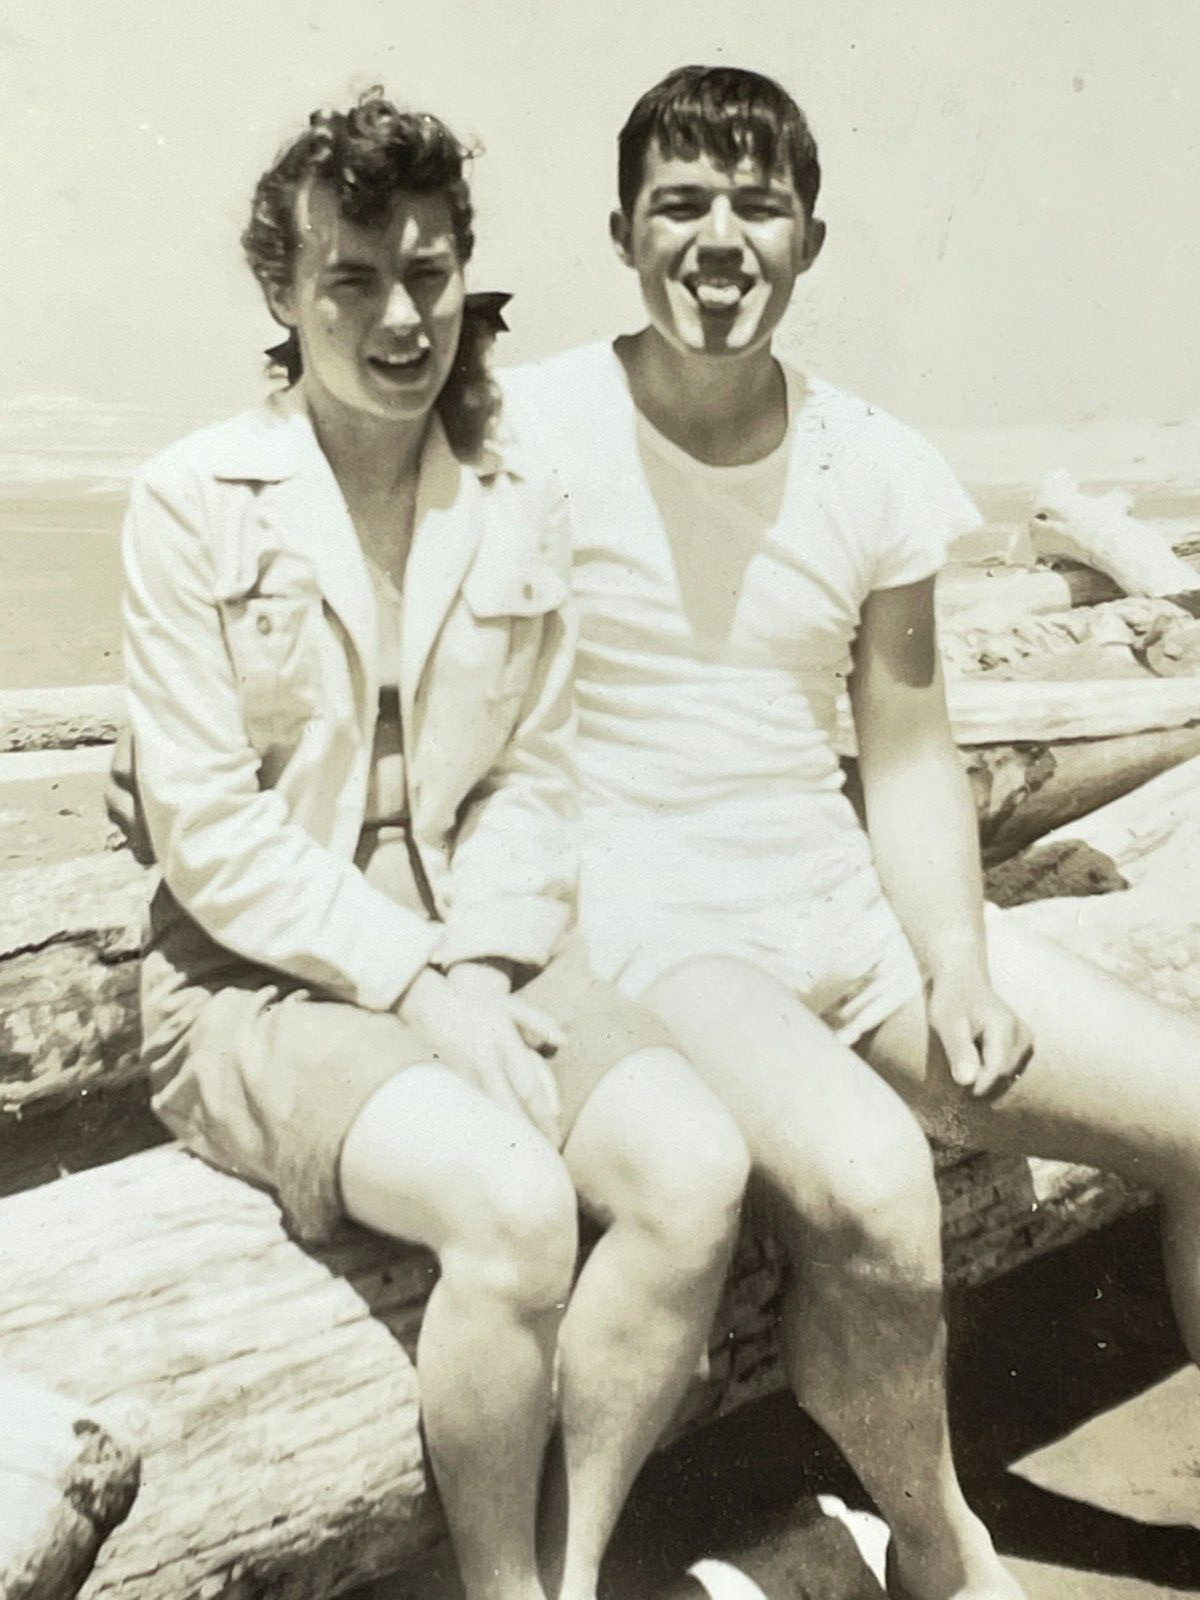 Q6 Photograph & Negative Cute Couple Beach Making Face Sticking Out Tongue 1940s